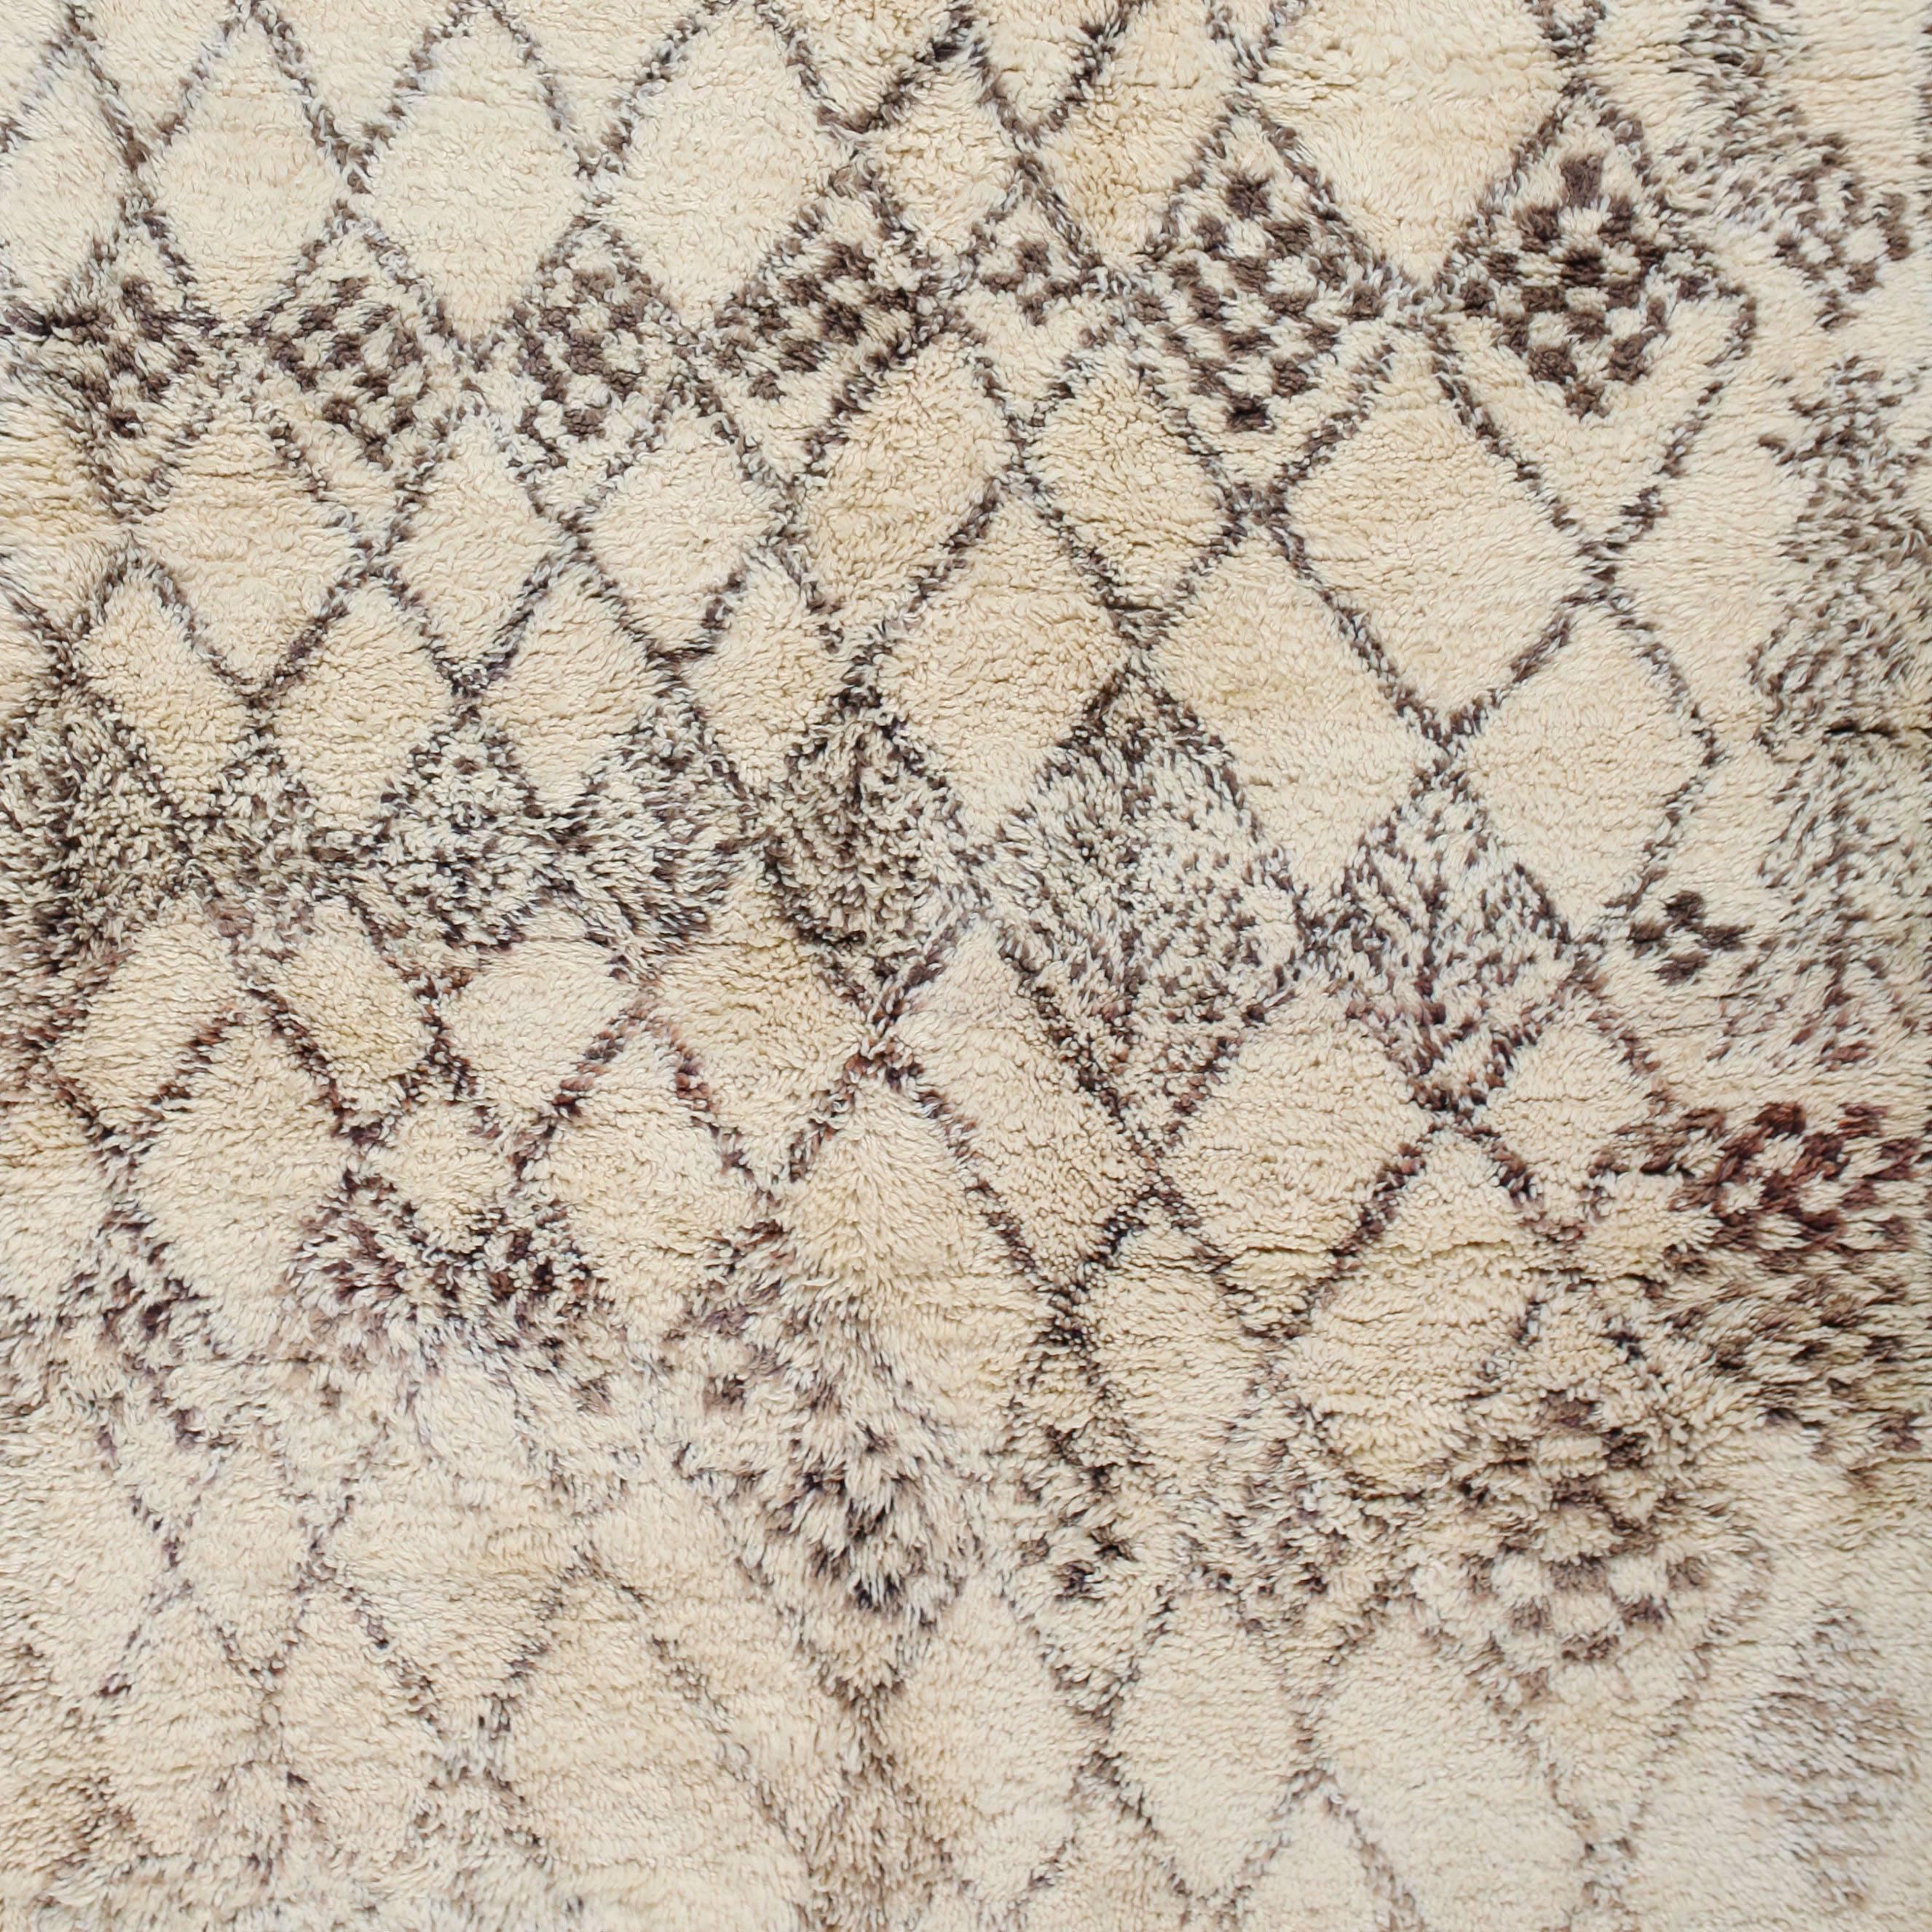 Welcome to the metaphysical world of Beni Ouarain weavers.
This authentic Berber carpet with a biomorphic pattern is hand knotted with a soft blend of subtle browns on a field of natural golden-white wool. The Beni Ouarain tribe produces some of